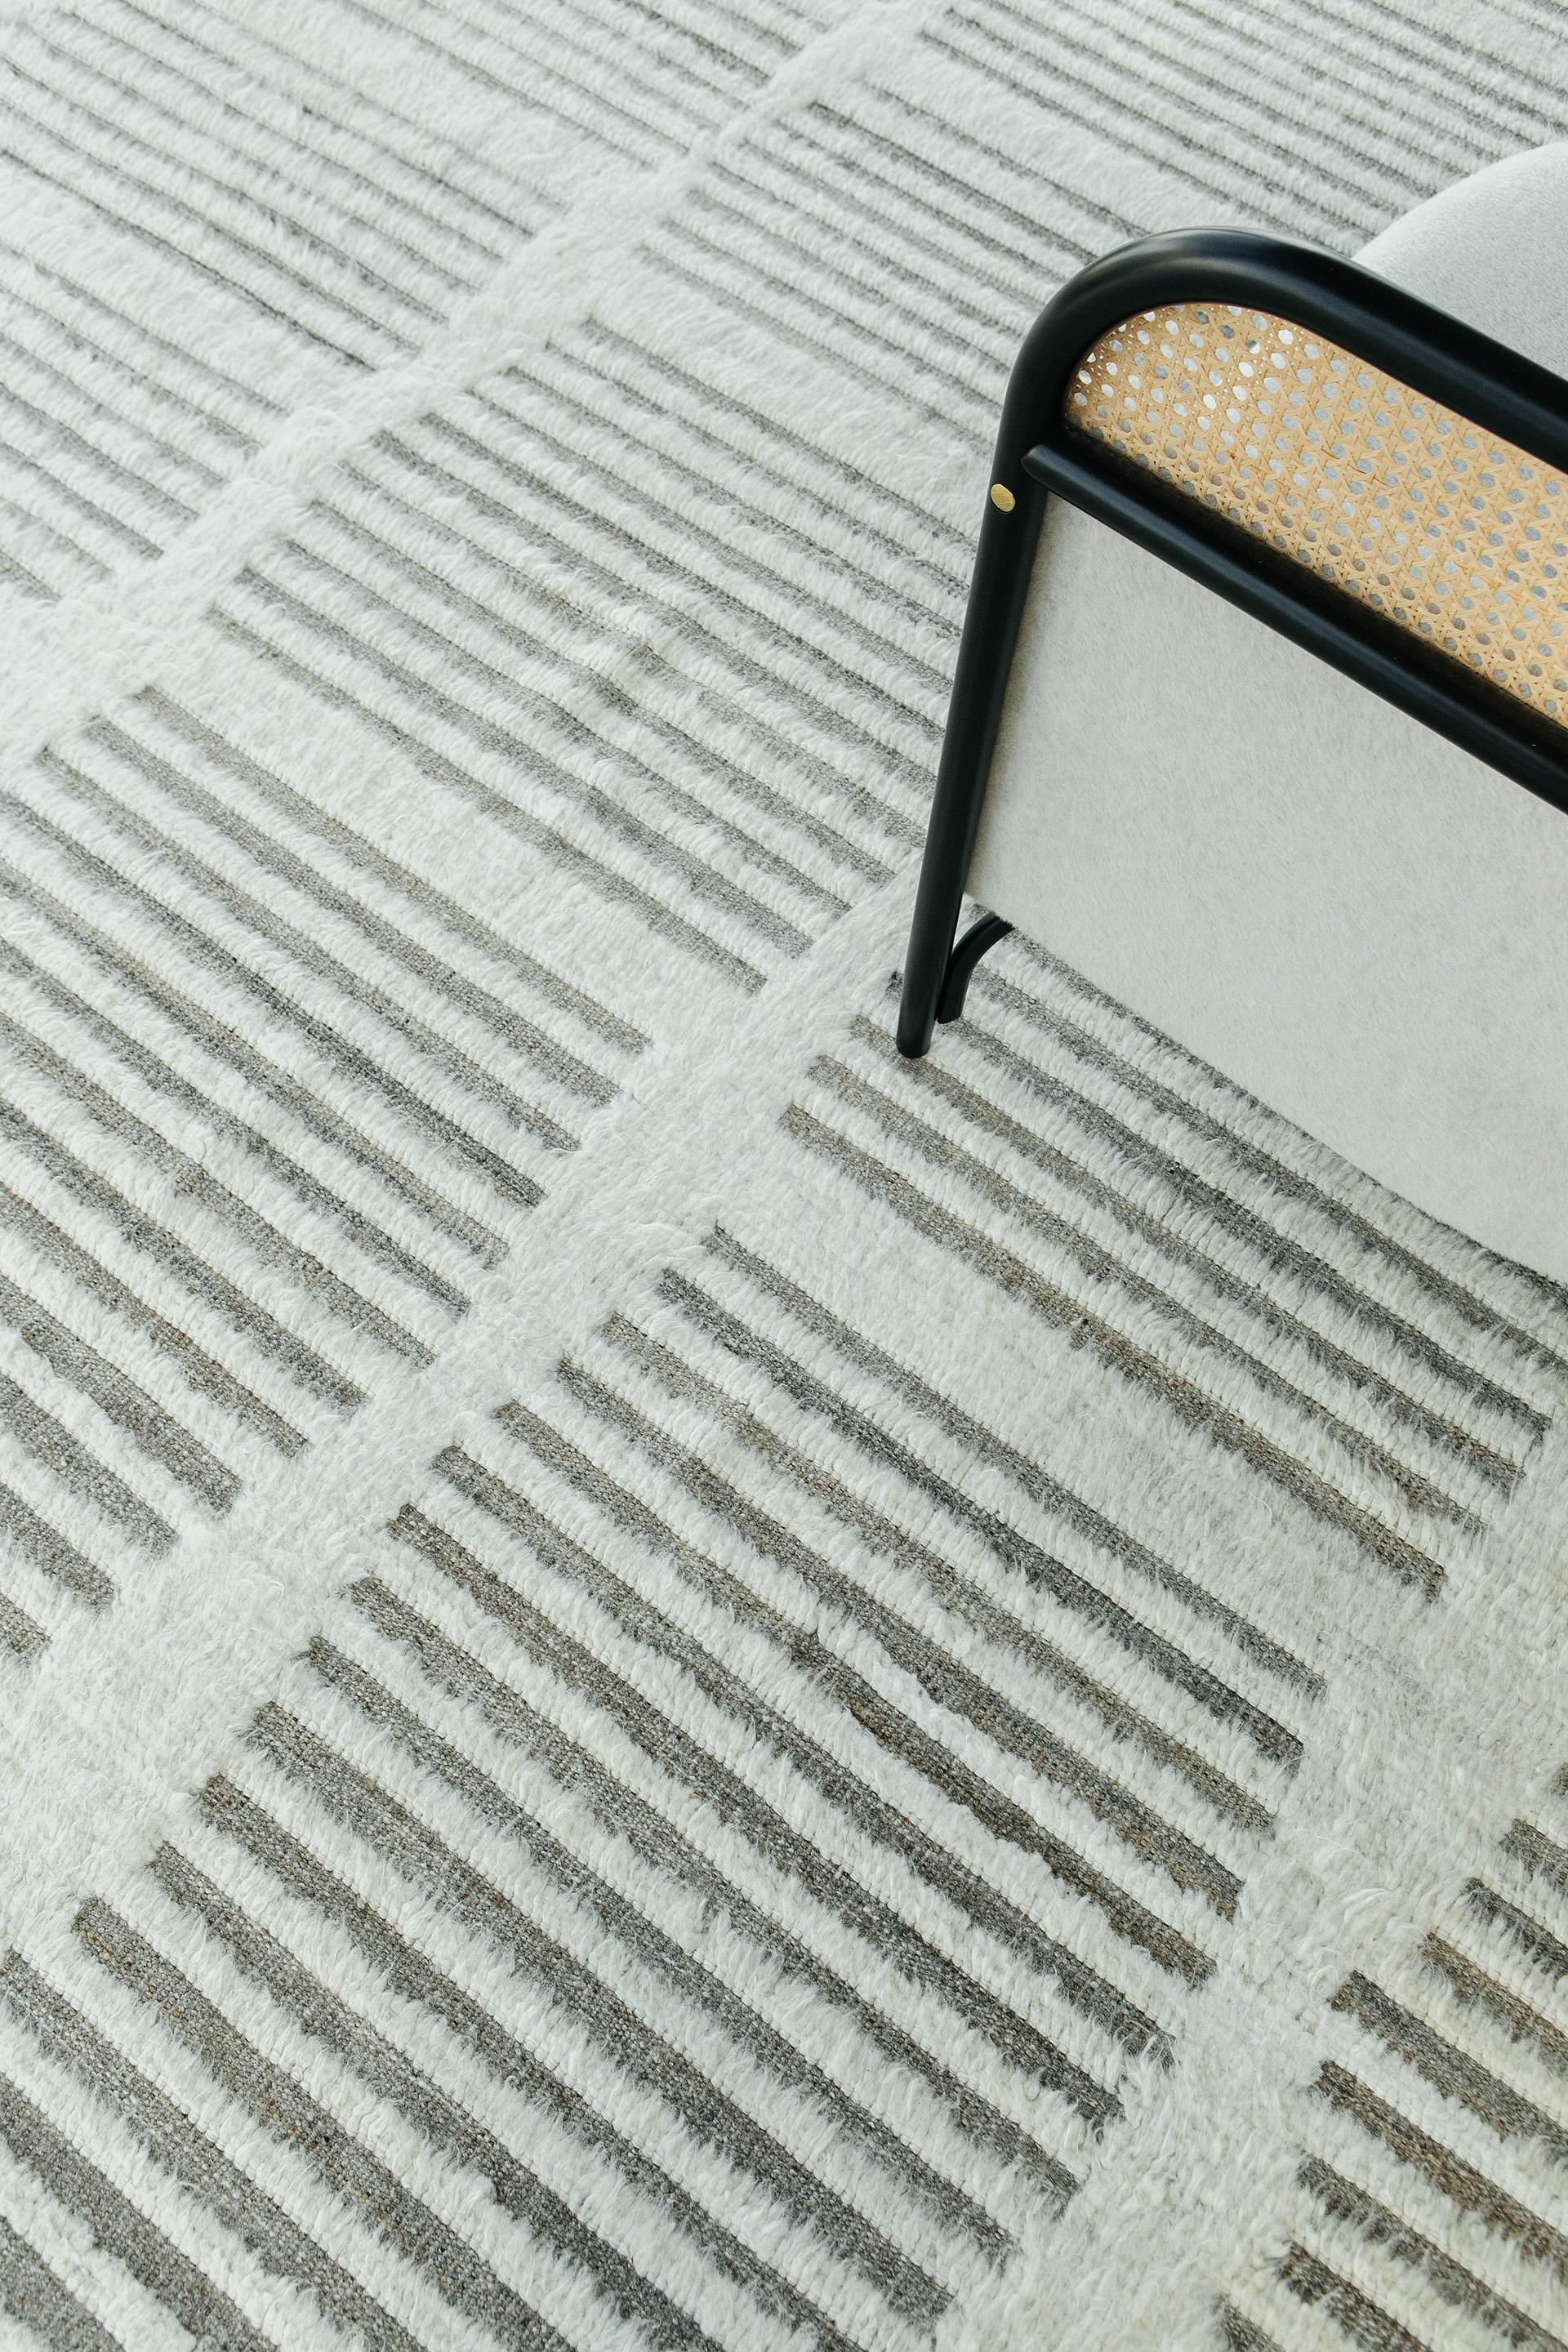 Handwoven of wool, Beshabar uses linework and color to create definition and movement. Embossed natural-toned detailing move across our perfect ivory-colored shag surface. Mehraban's Haute Bohemian collection is designed in Los Angeles and named for